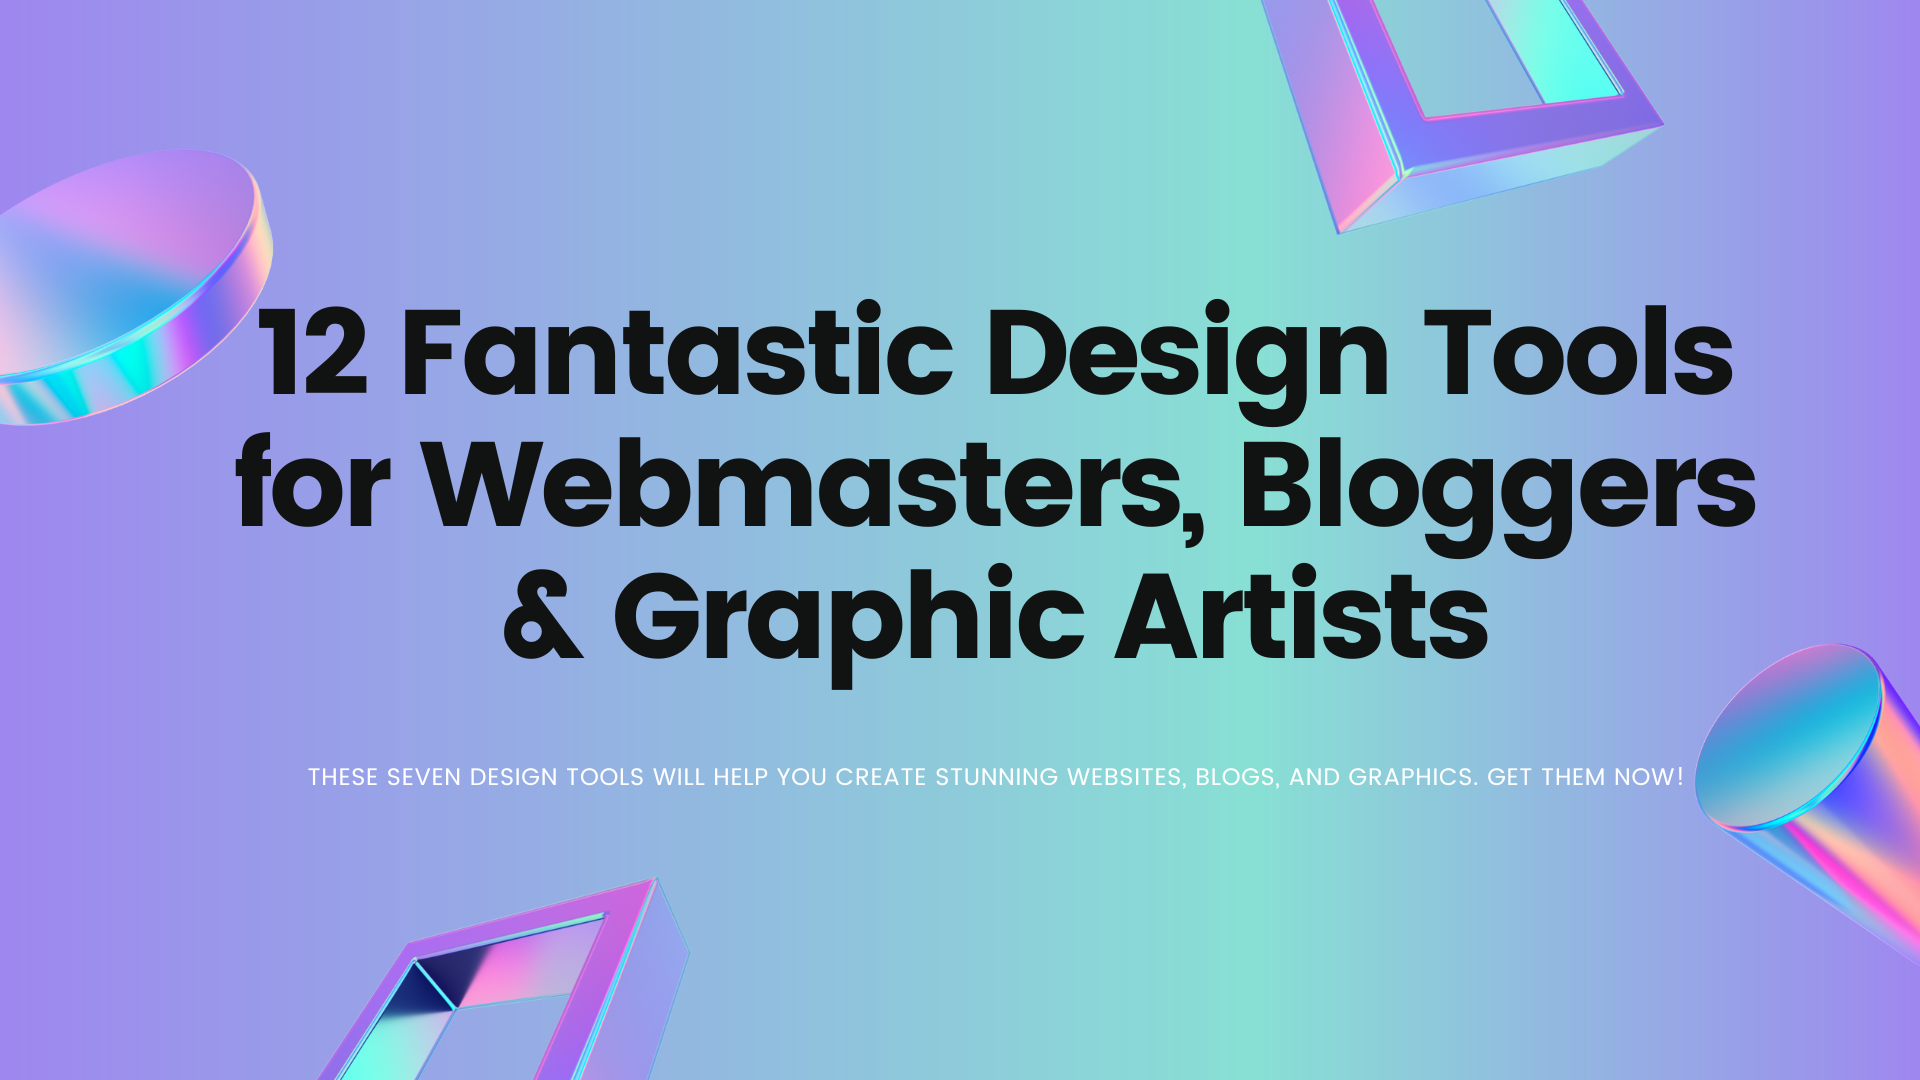 12 Fantastic Design Tools for Webmasters, Bloggers & Graphic Artists